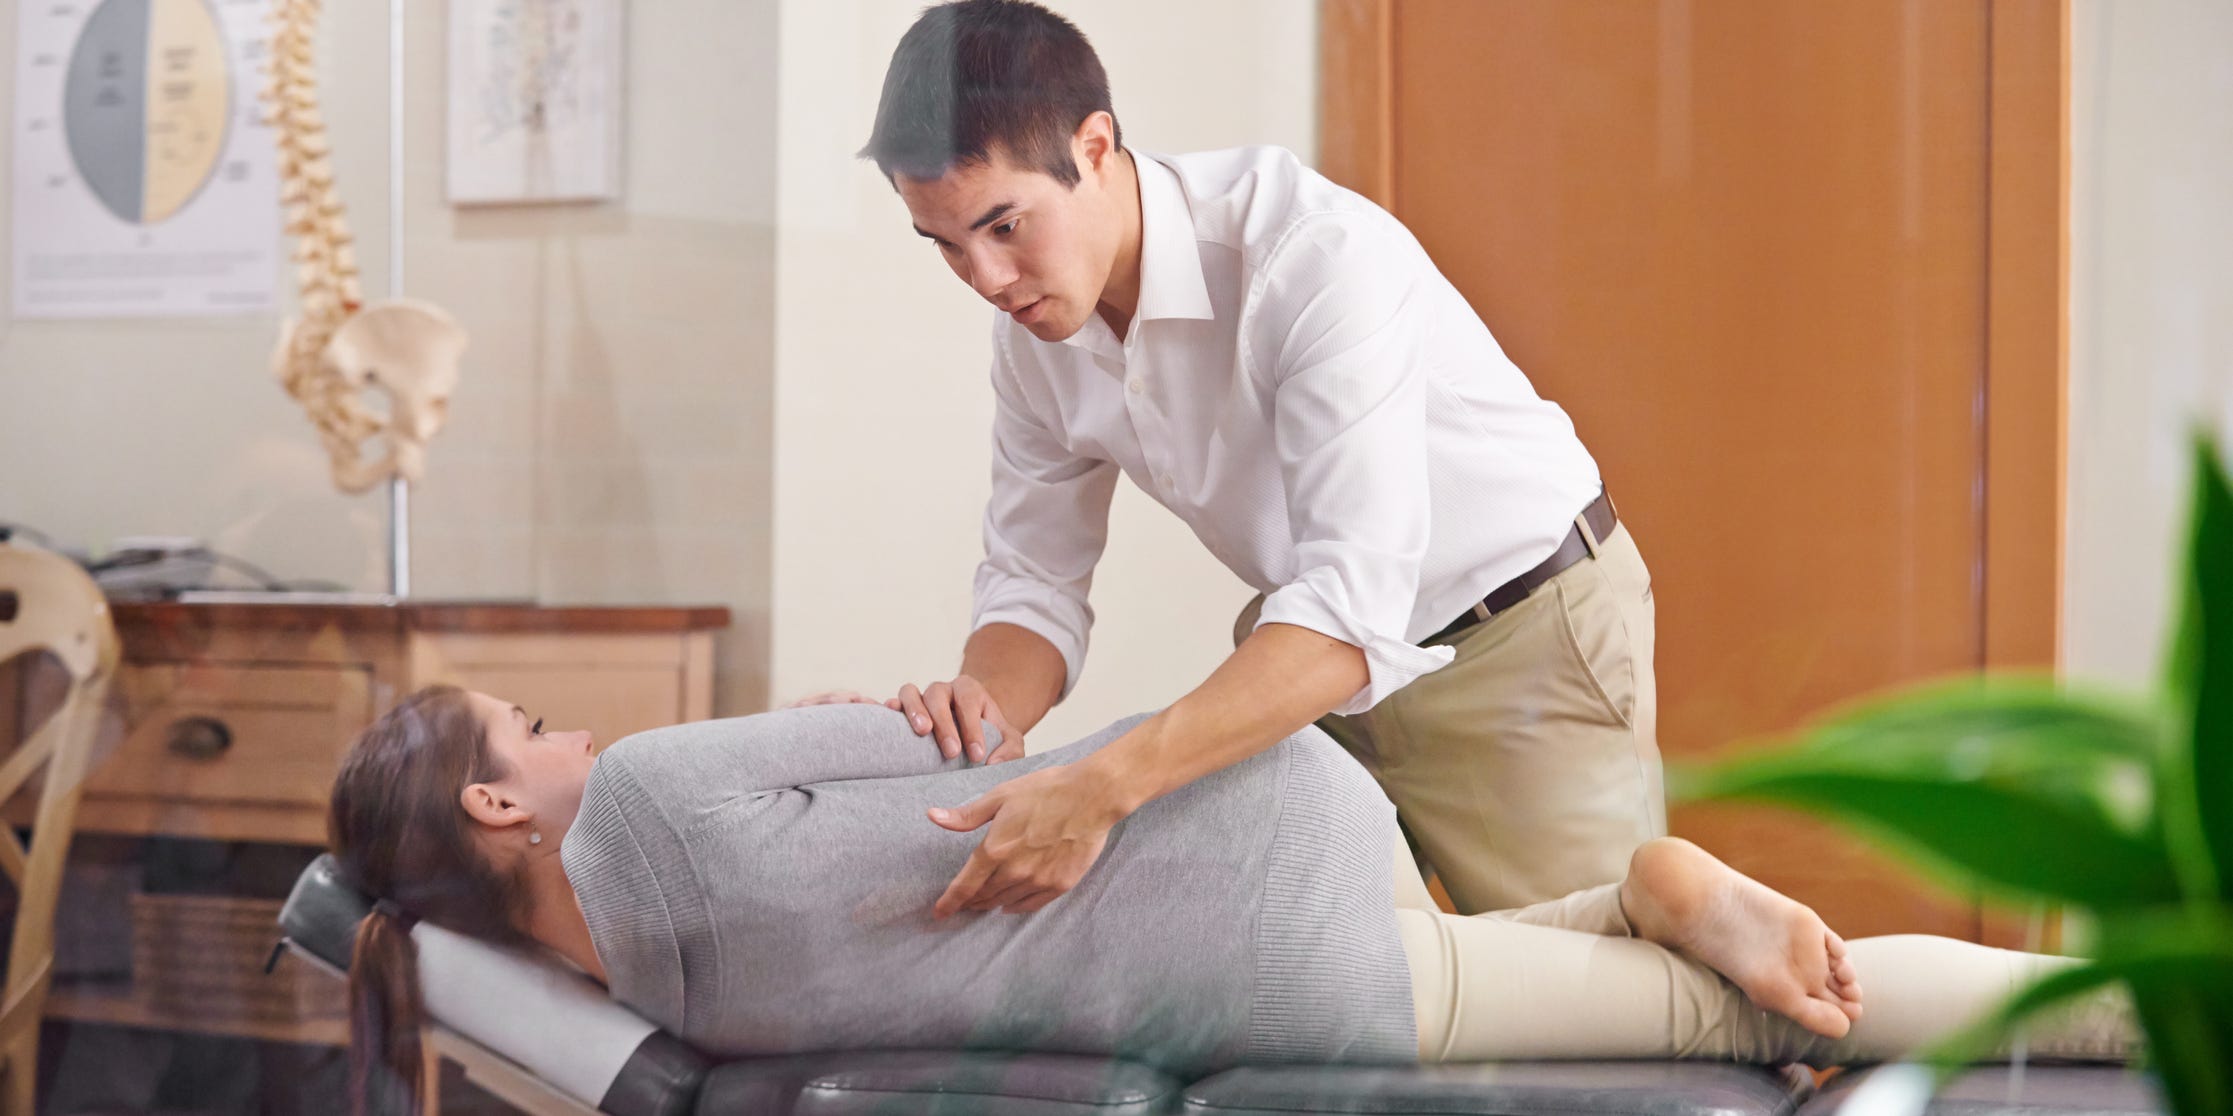 chiropractor adjusting a persons spine